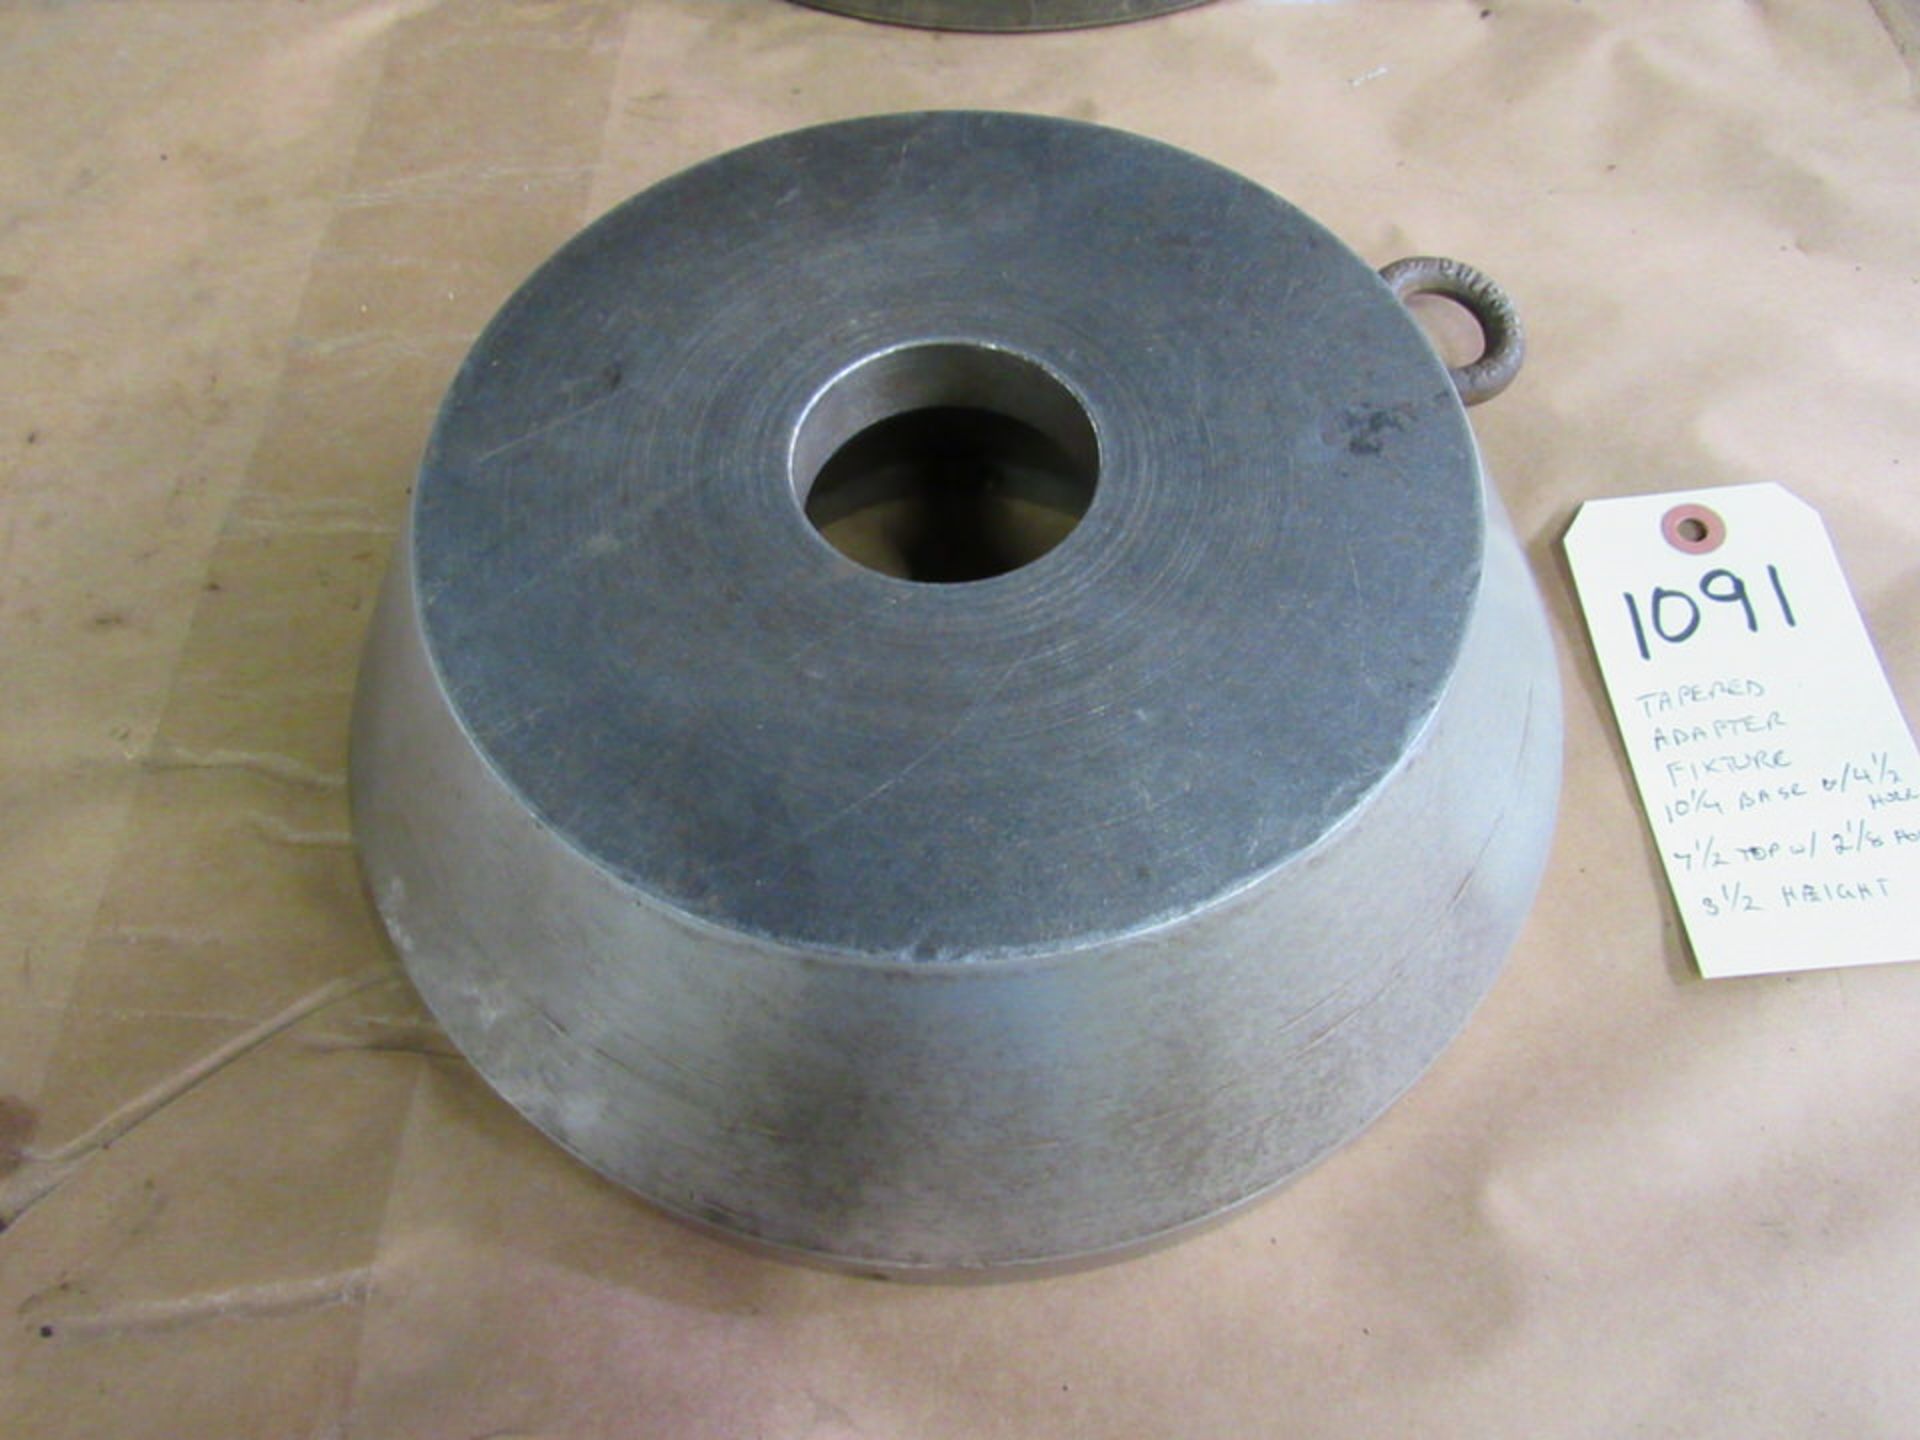 Tapered Adapter Fixture, 10-1/4" base with 4-1/2" hole, 7-1/2" top with 2-1/8" hole, 3-1/2"